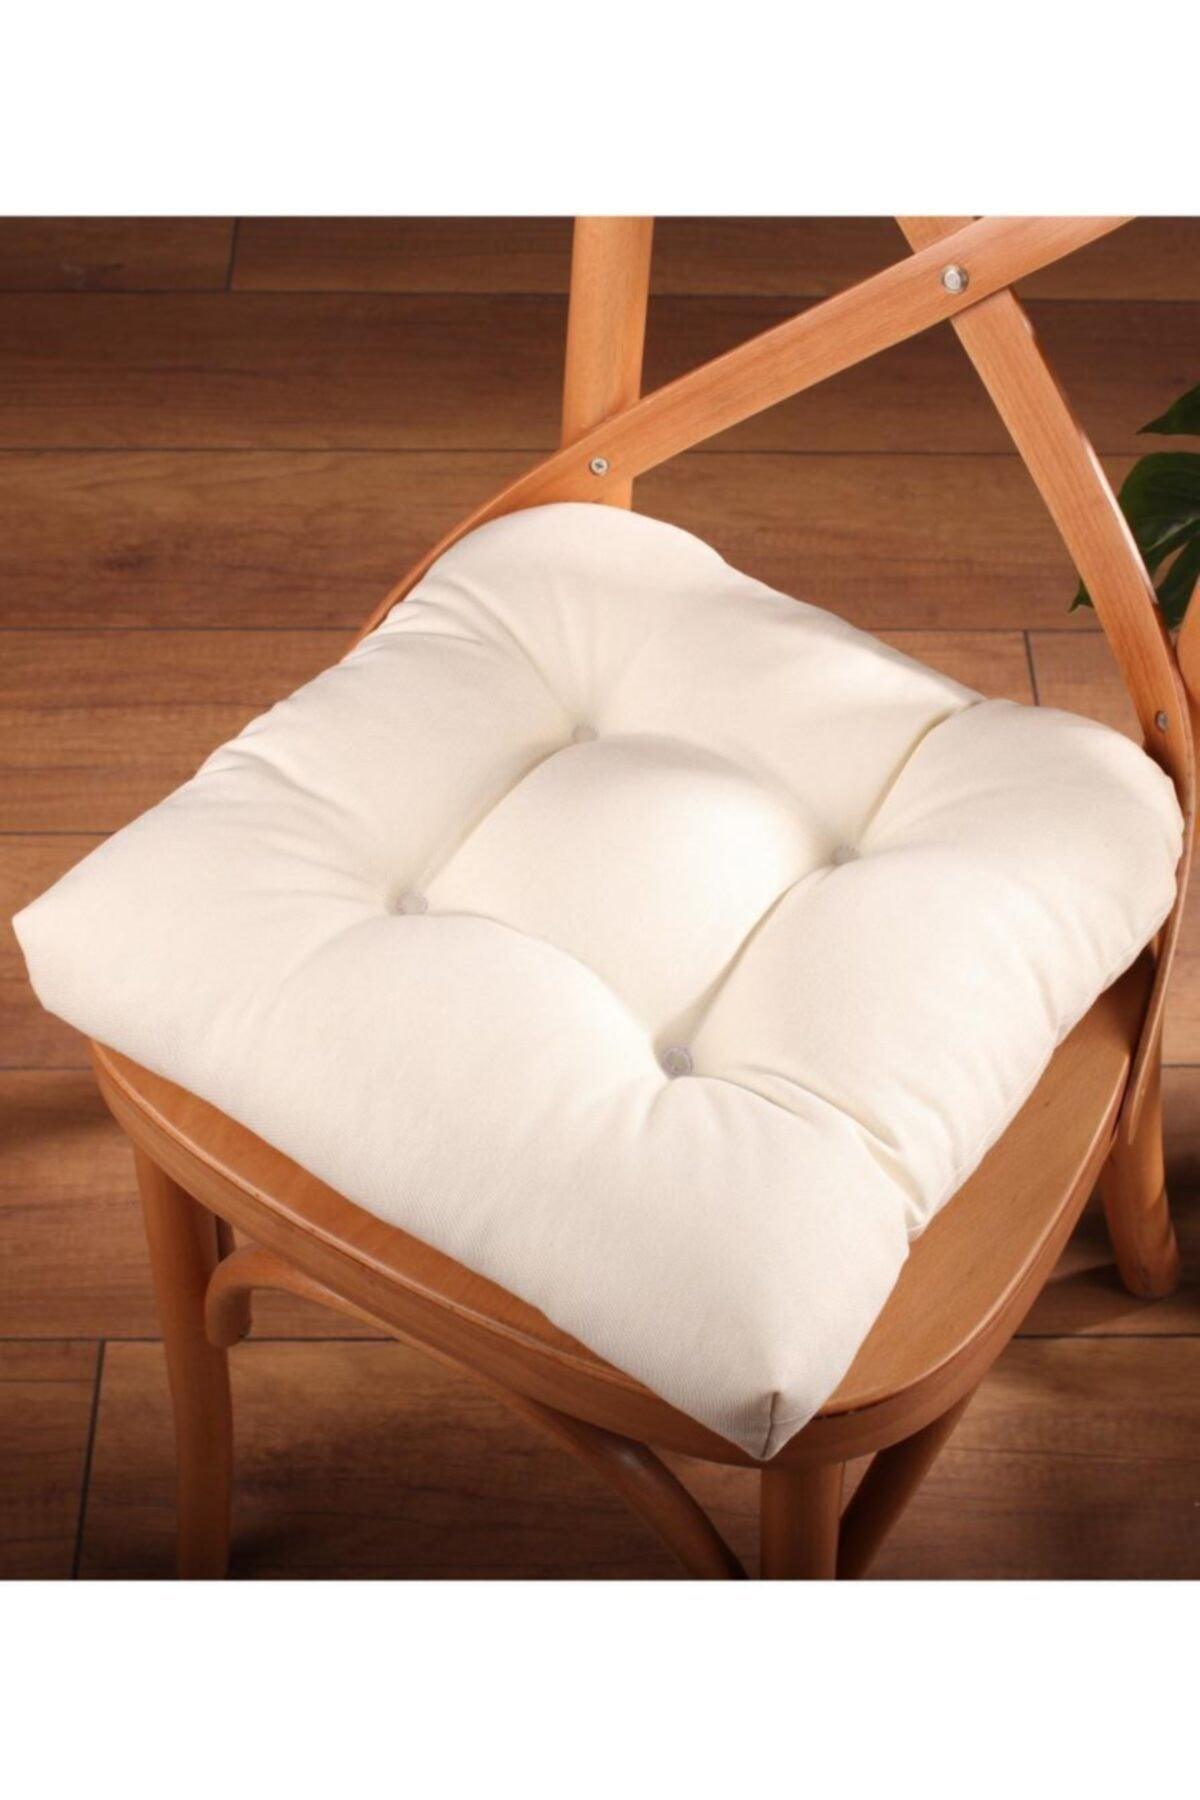 Lux Pofidik Cream Chair Cushion Special Stitched Laced 40x40cm - Swordslife